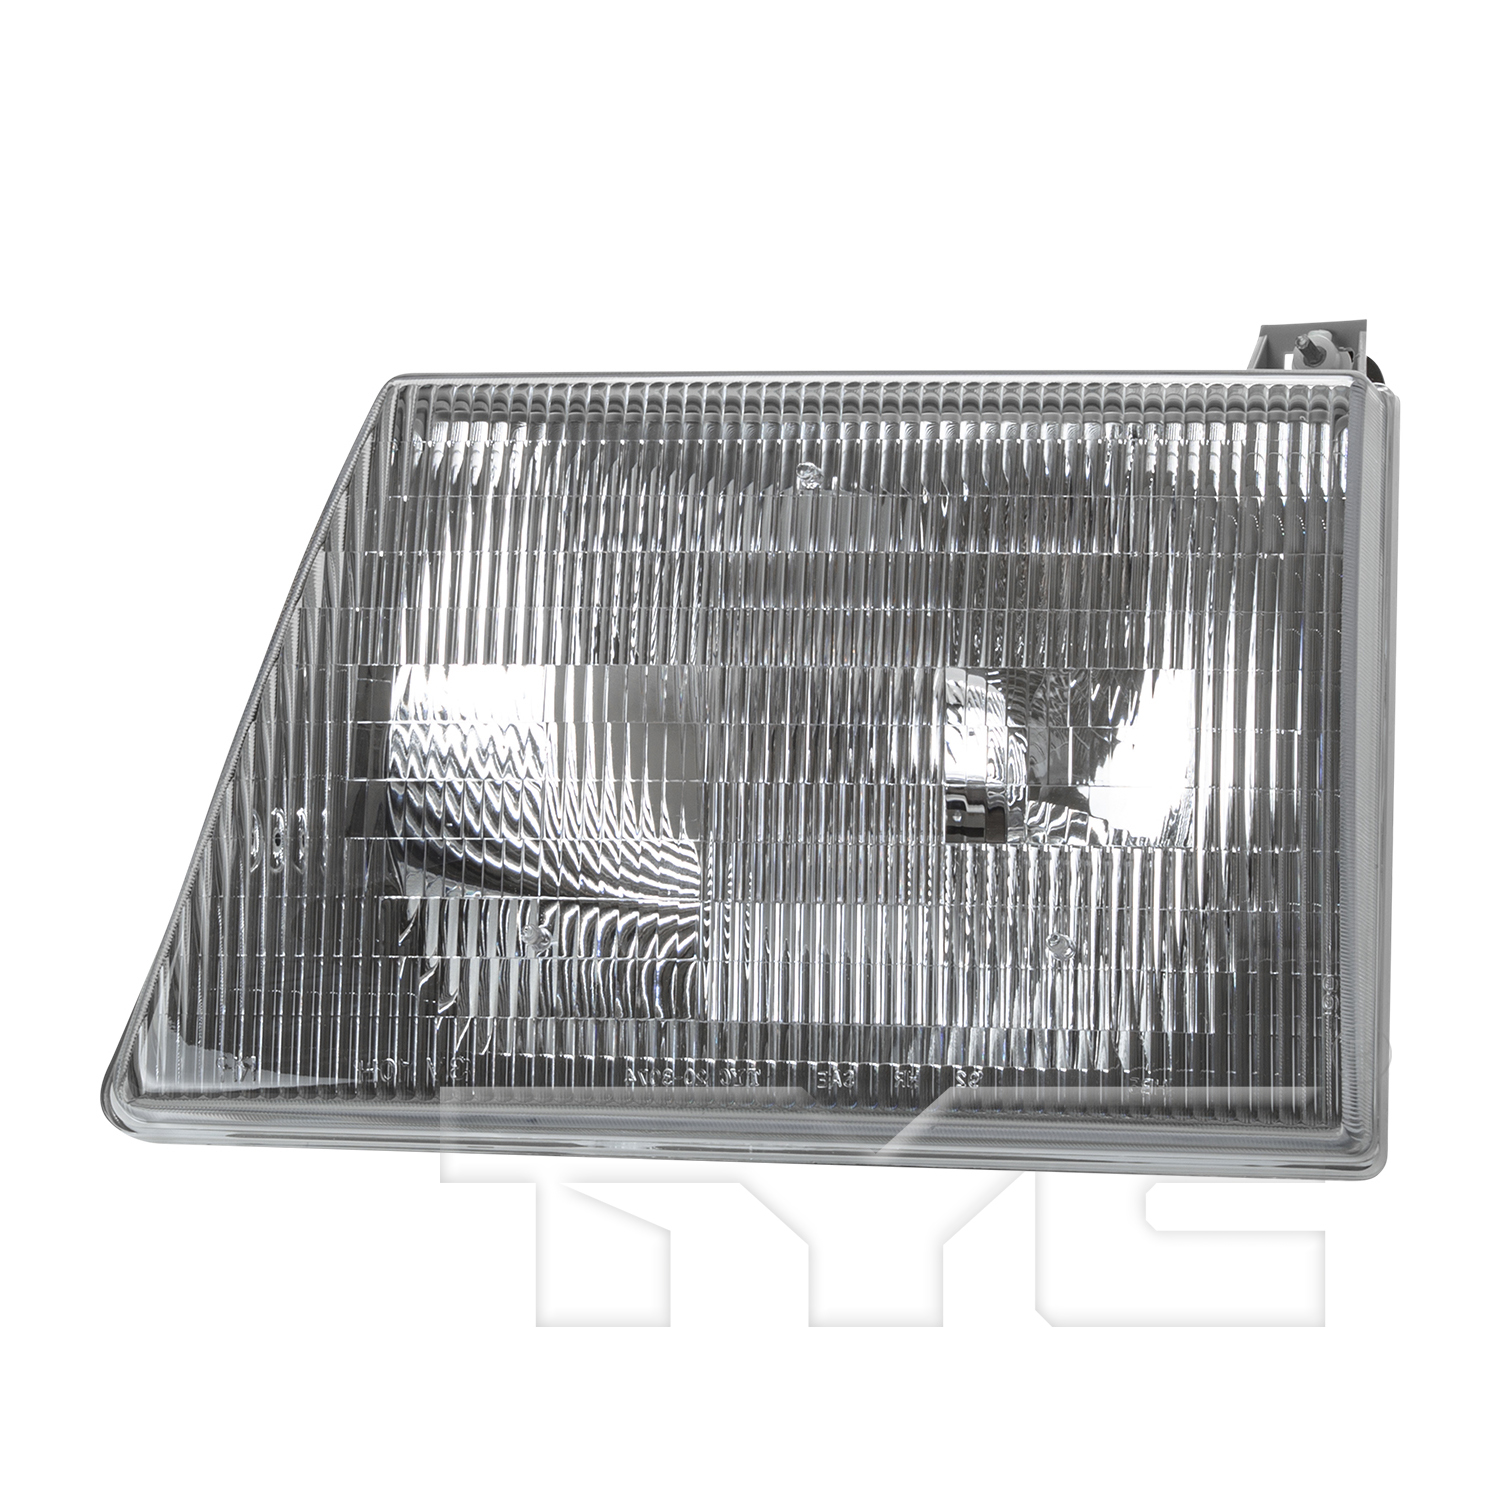 Aftermarket HEADLIGHTS for FORD - E-250, E-250,03-07,LT Headlamp assy composite